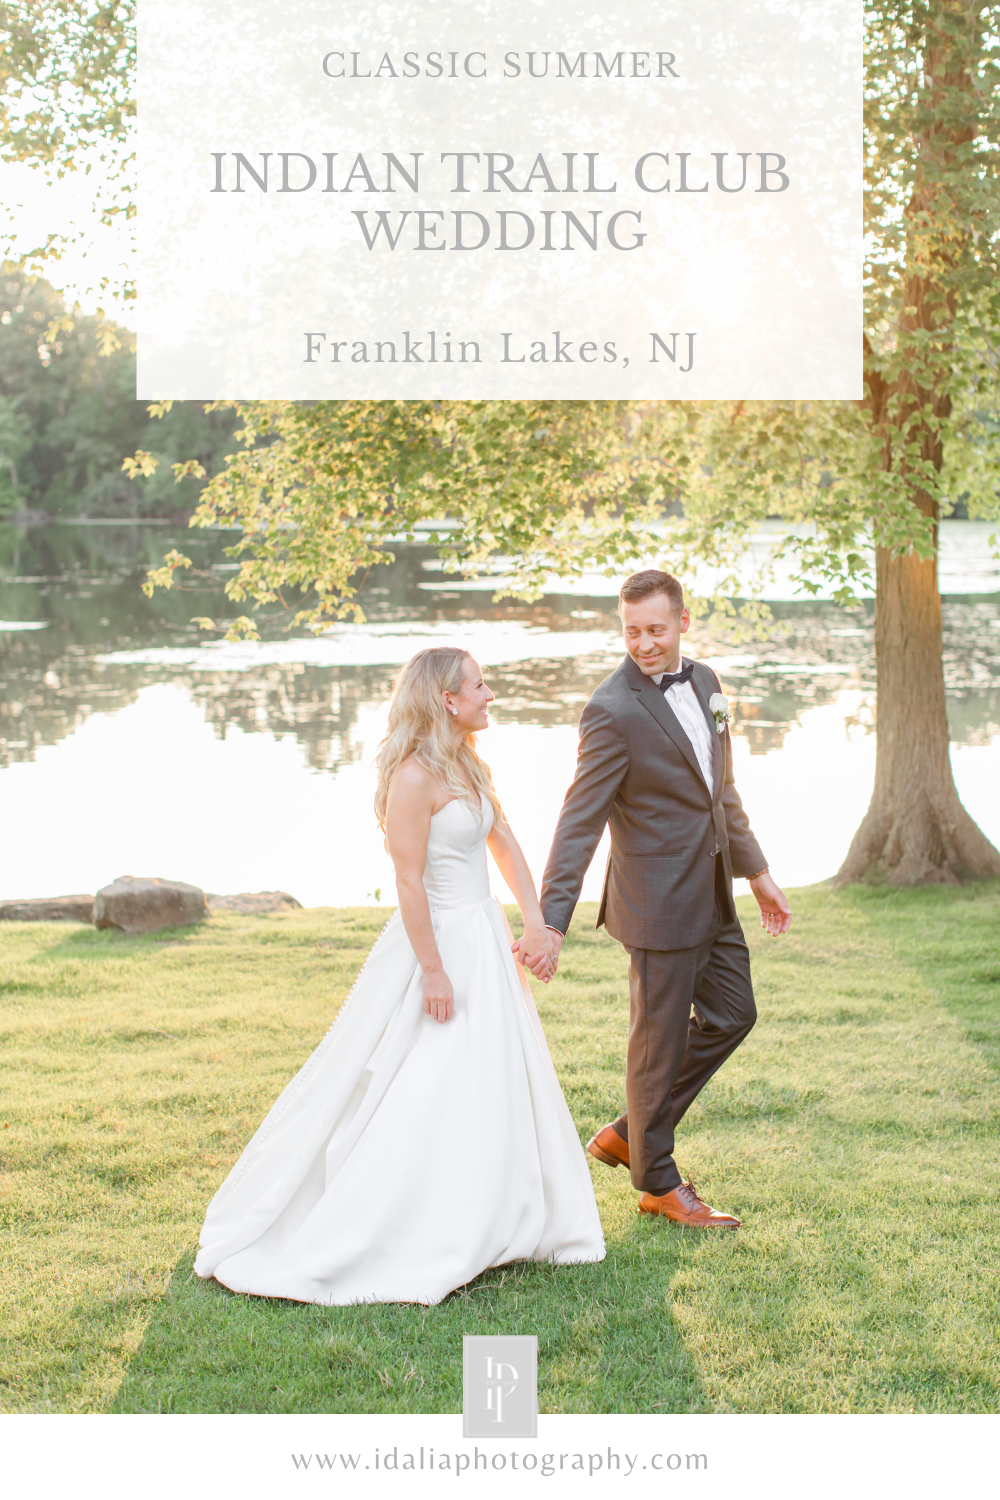 summertime wedding at Indian Trail Club in Franklin Lakes, NJ